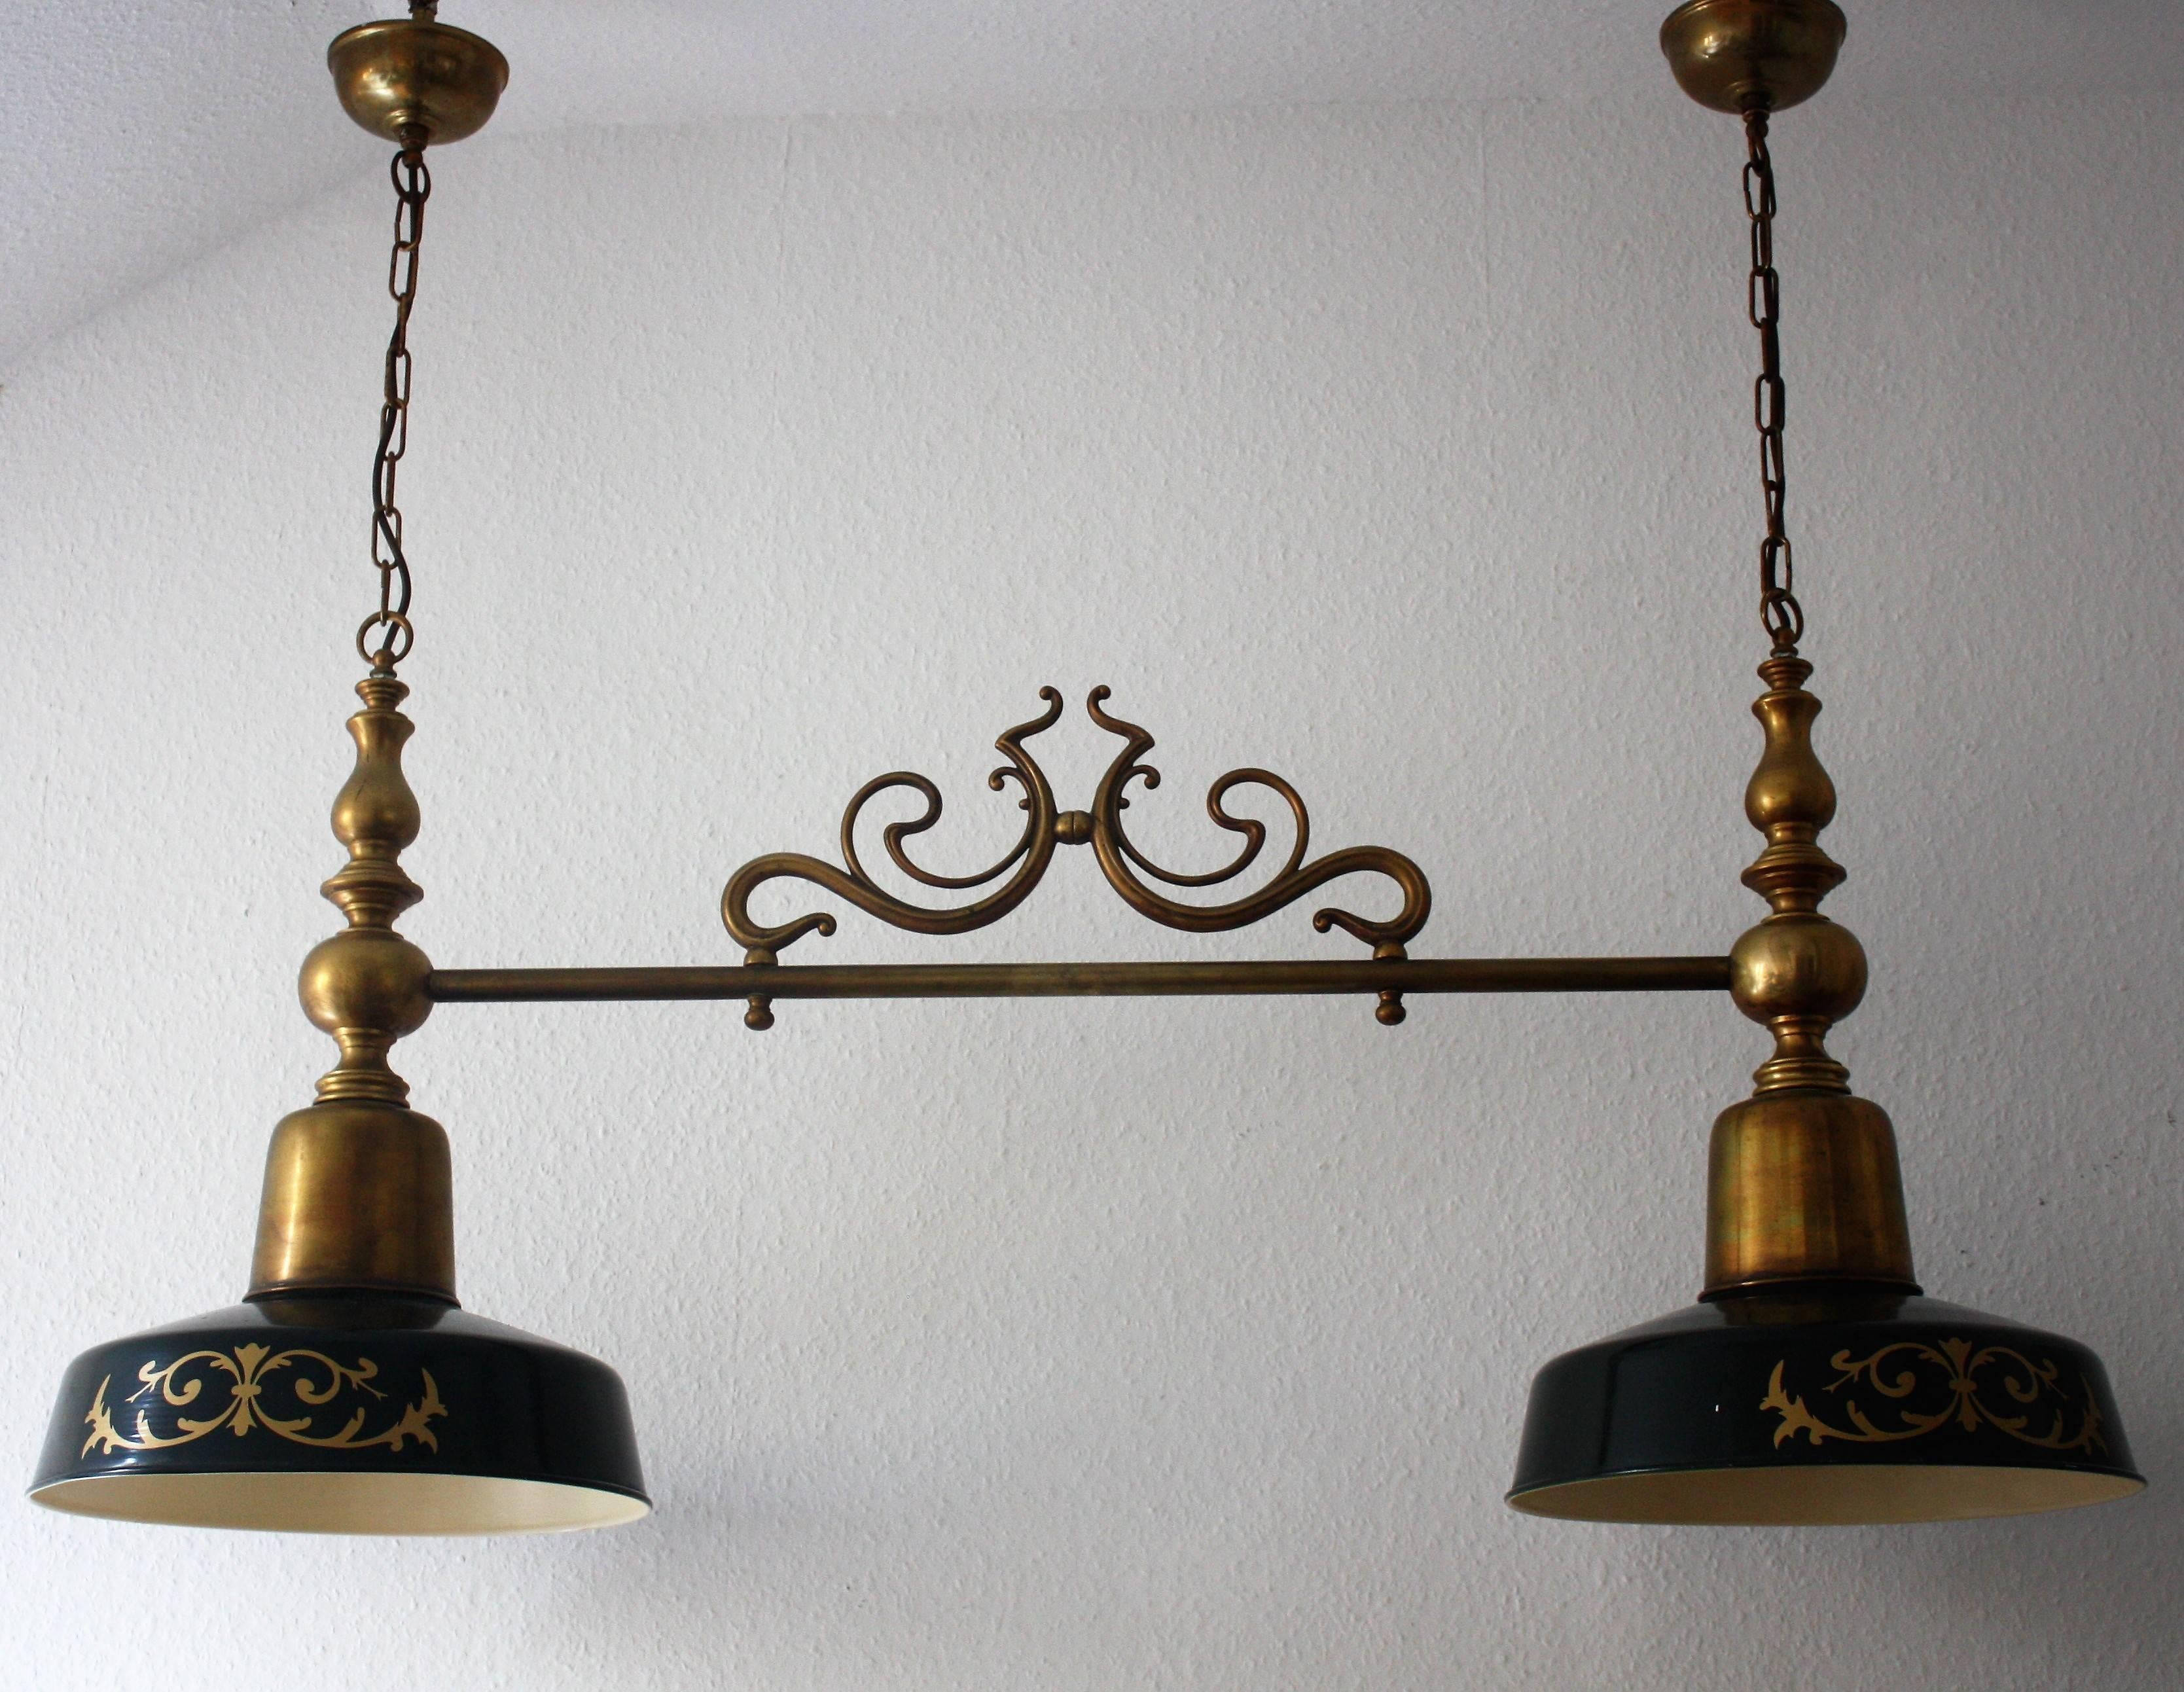 Huge brass and green lacquered metal chandelier for billiard/snooker/poker or kitchen island.
Lamp socket: Two x Edison (E27) for standard screw bulbs.
In good vintage condition.
Probably England, circa 1940s-1950s.